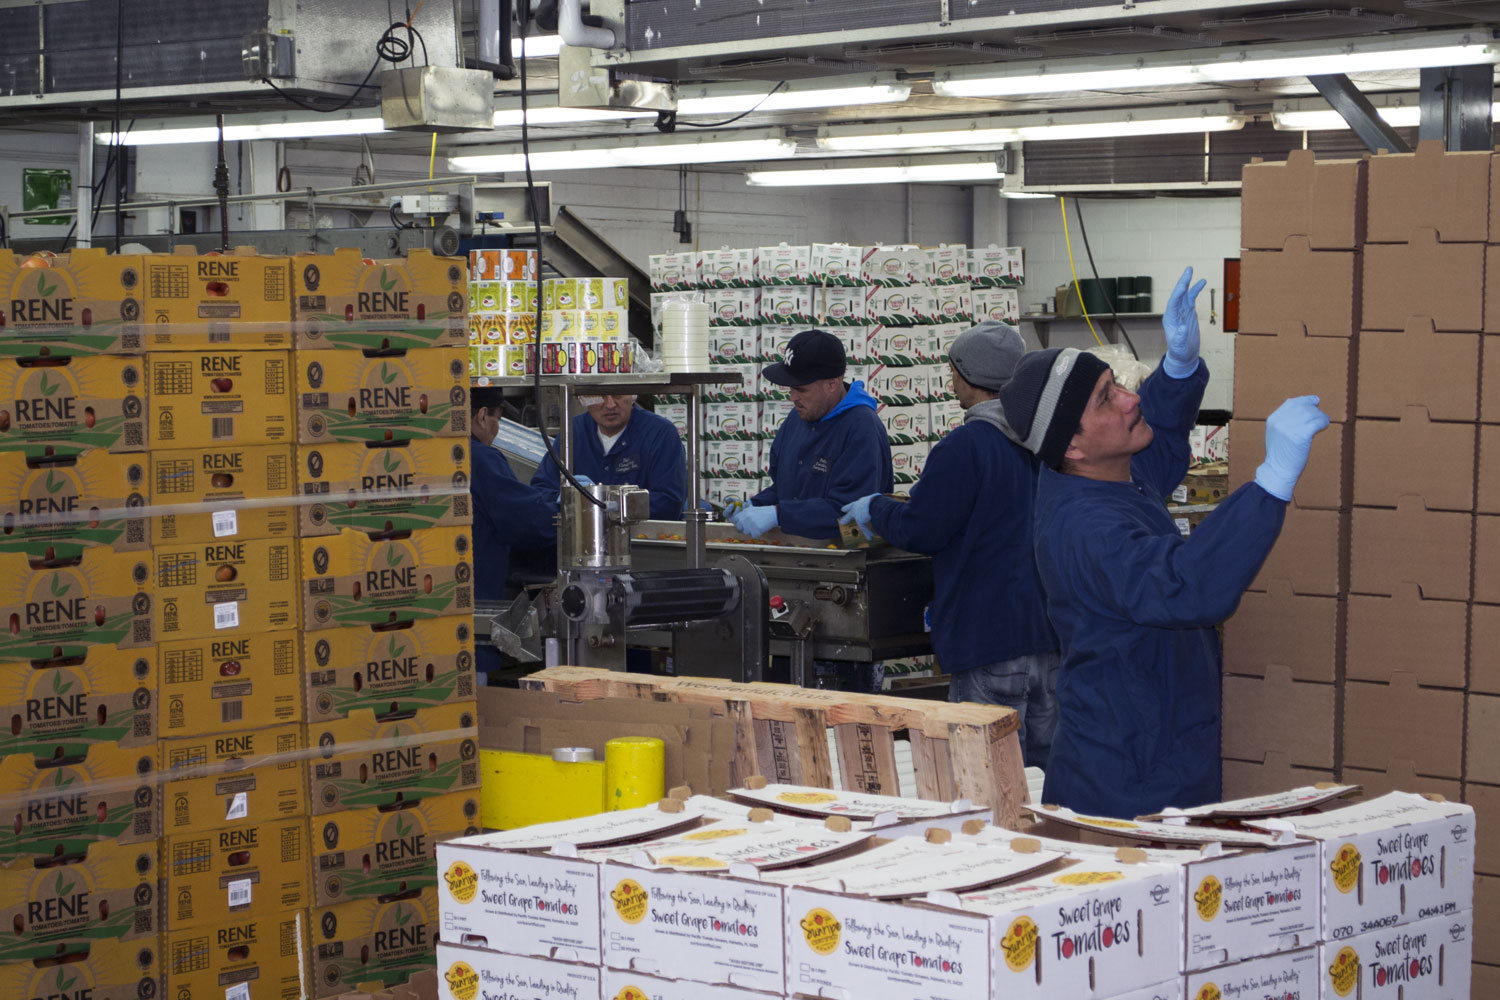 Workers in warehouse remote refrigeration controls